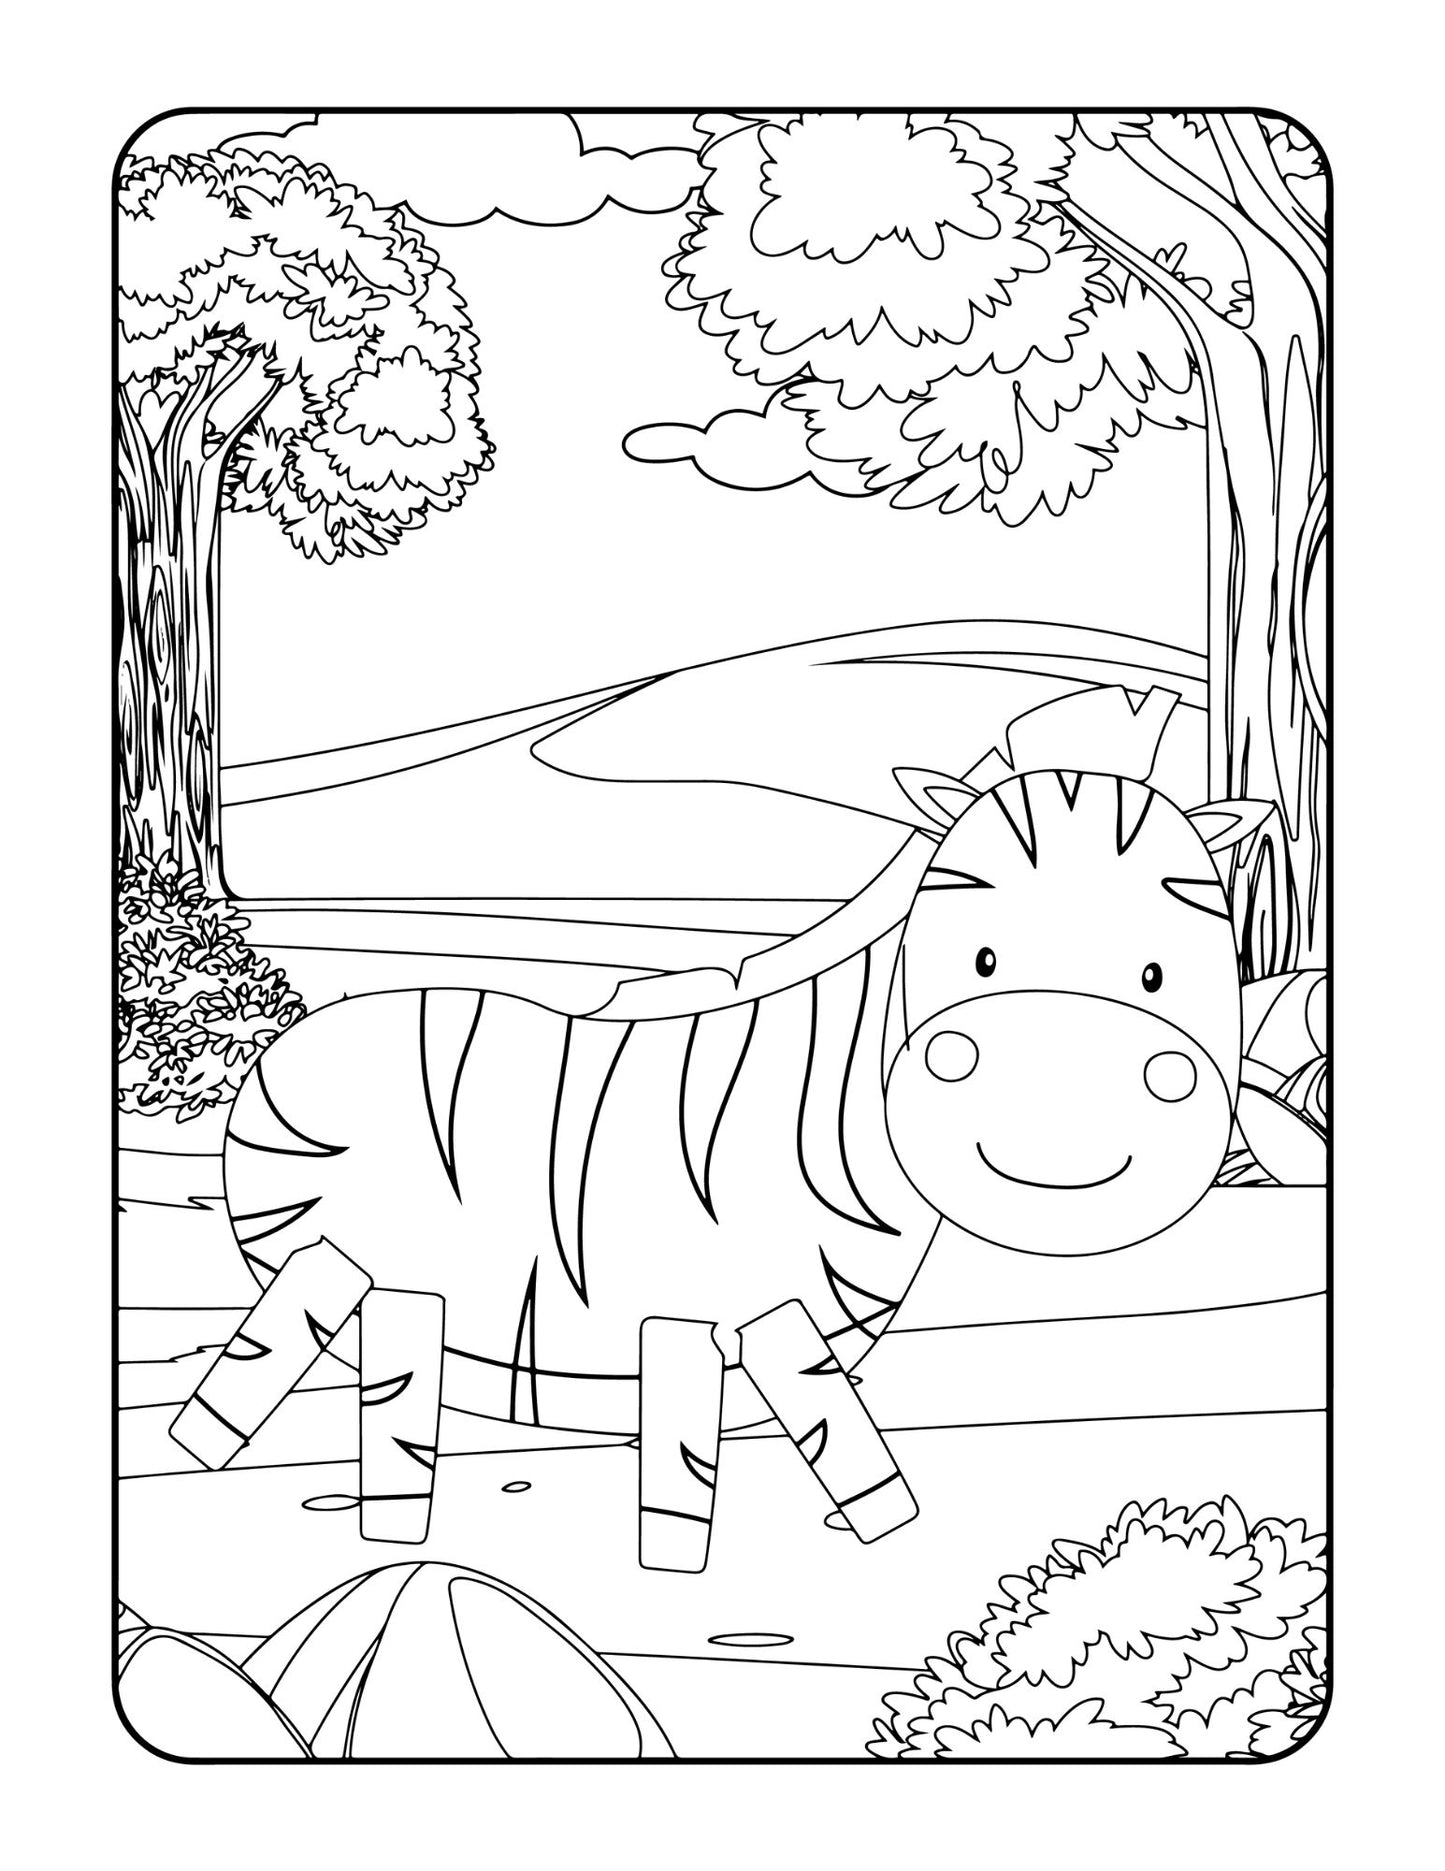 Coloring Book Gift Forest Animals Coloring Book for Kids Adults Coloring for Kids Coloring Workbook Coloring Pages for Kids Colouring Book